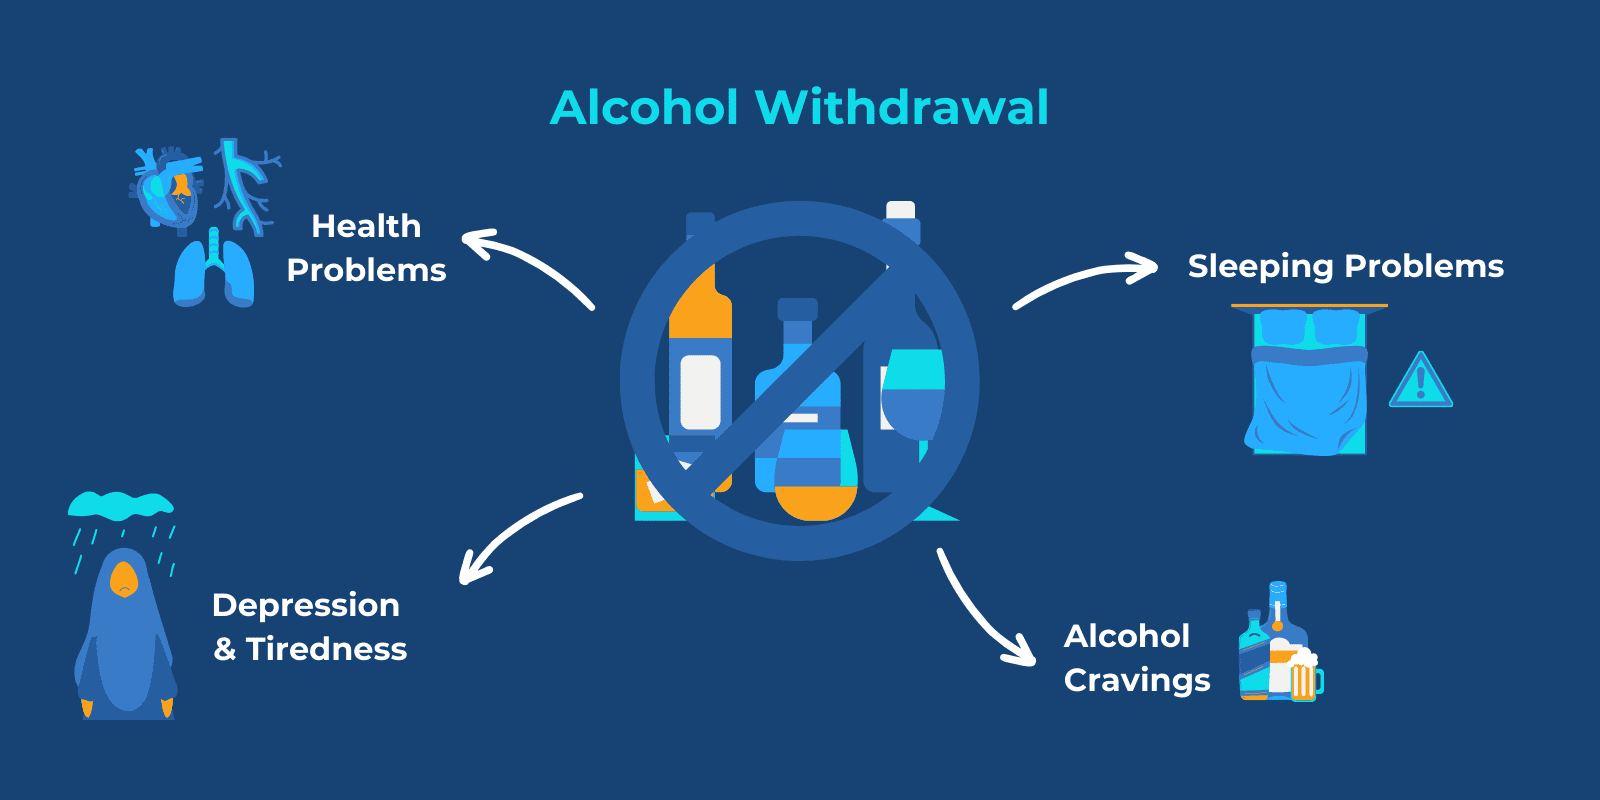 Alcohol Withdrawal text written on top of bottles of alcohol graphic in the middle behind an x sign and different withdrawal symptoms surrounding the graphic